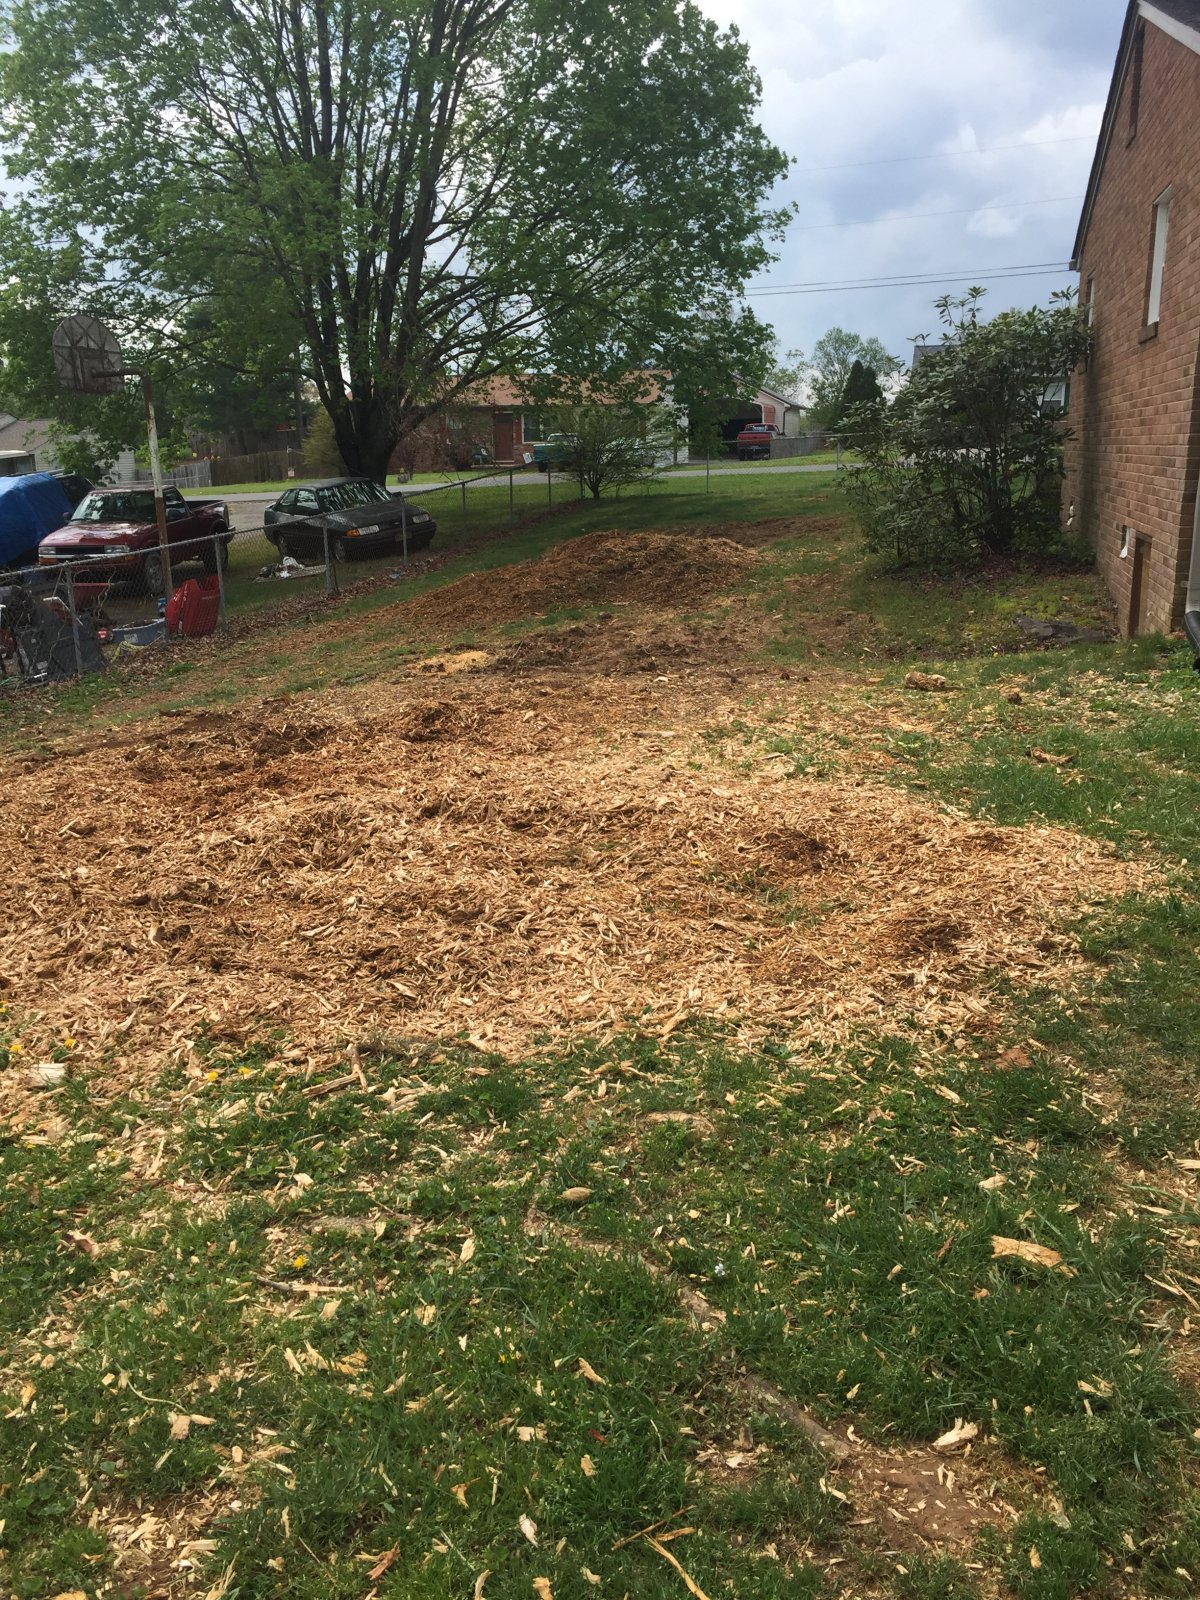 Repairing my yard after tree removal